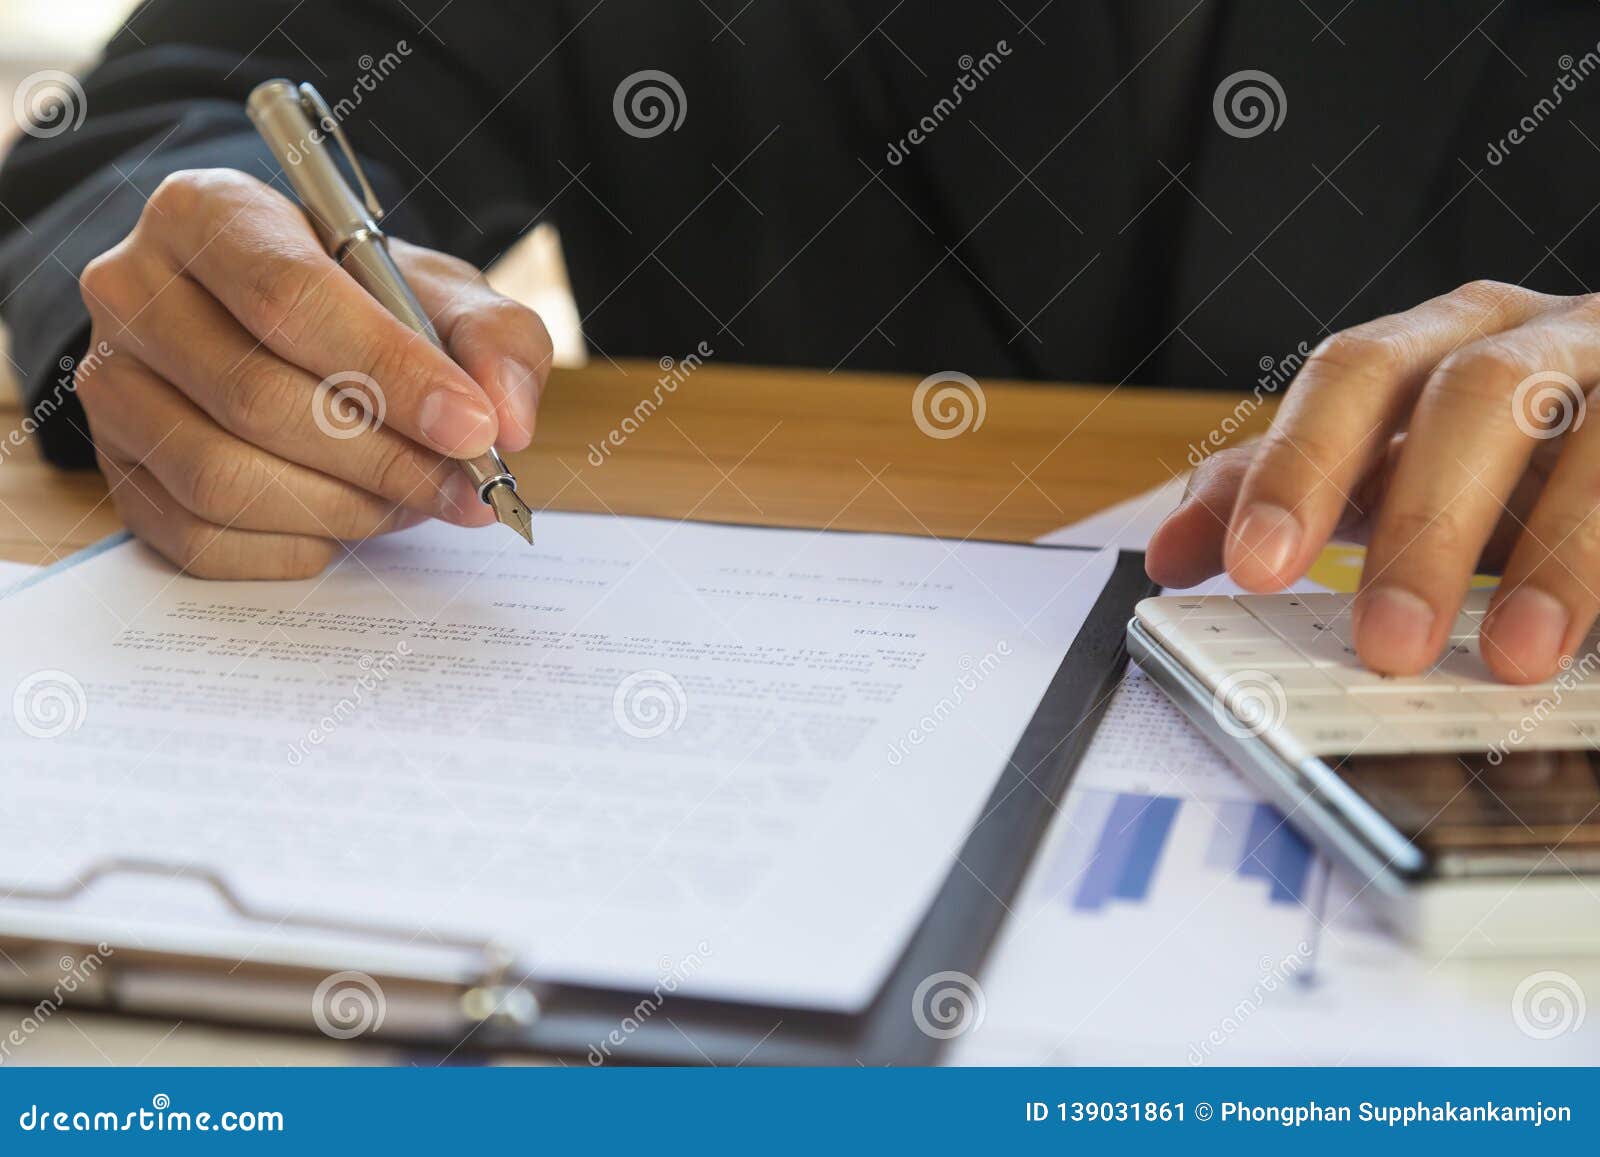 business man signing a contract. owns the business sign personally,director of the company, solicitor. real estate agent holding